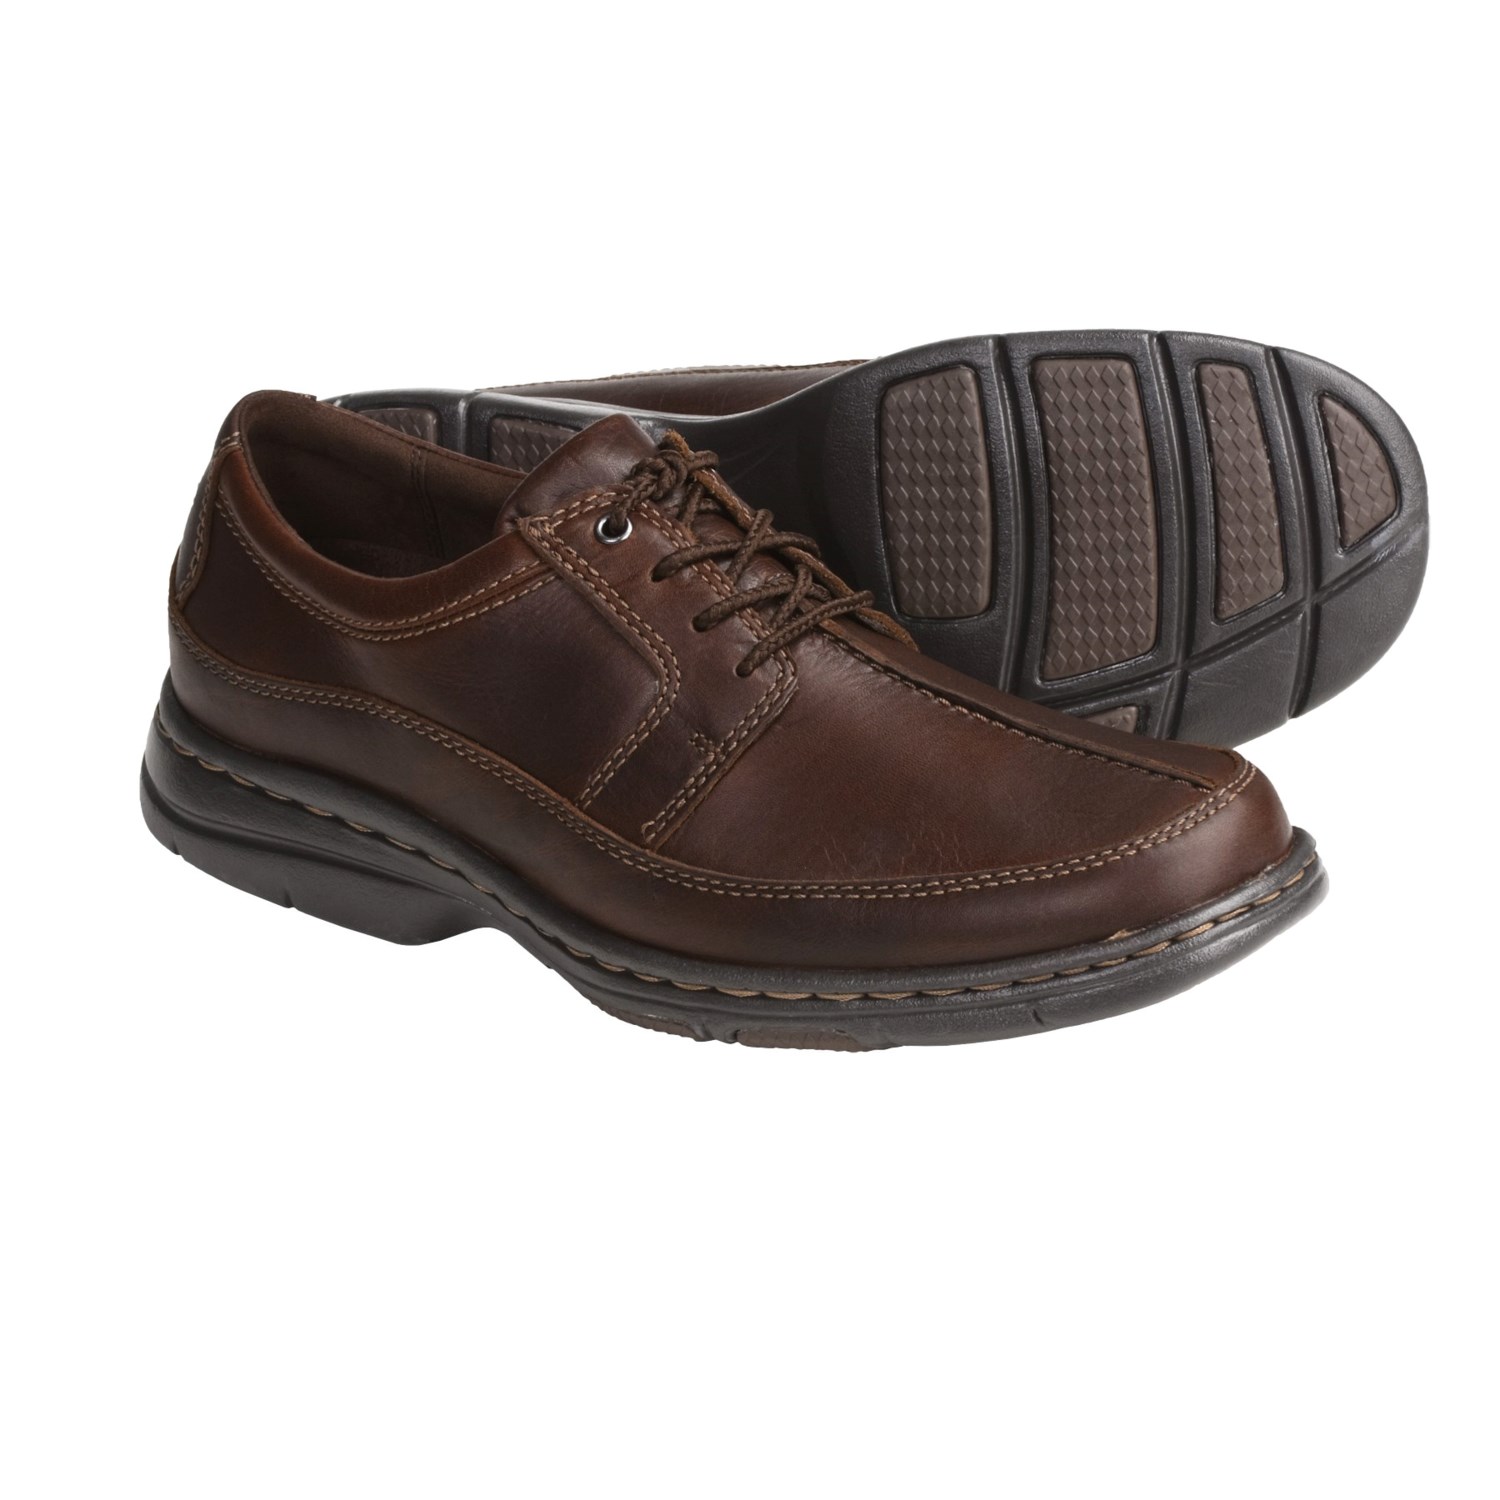 Dunham Weston Shoes - Oxfords, Leather (For Men) - Save 48%